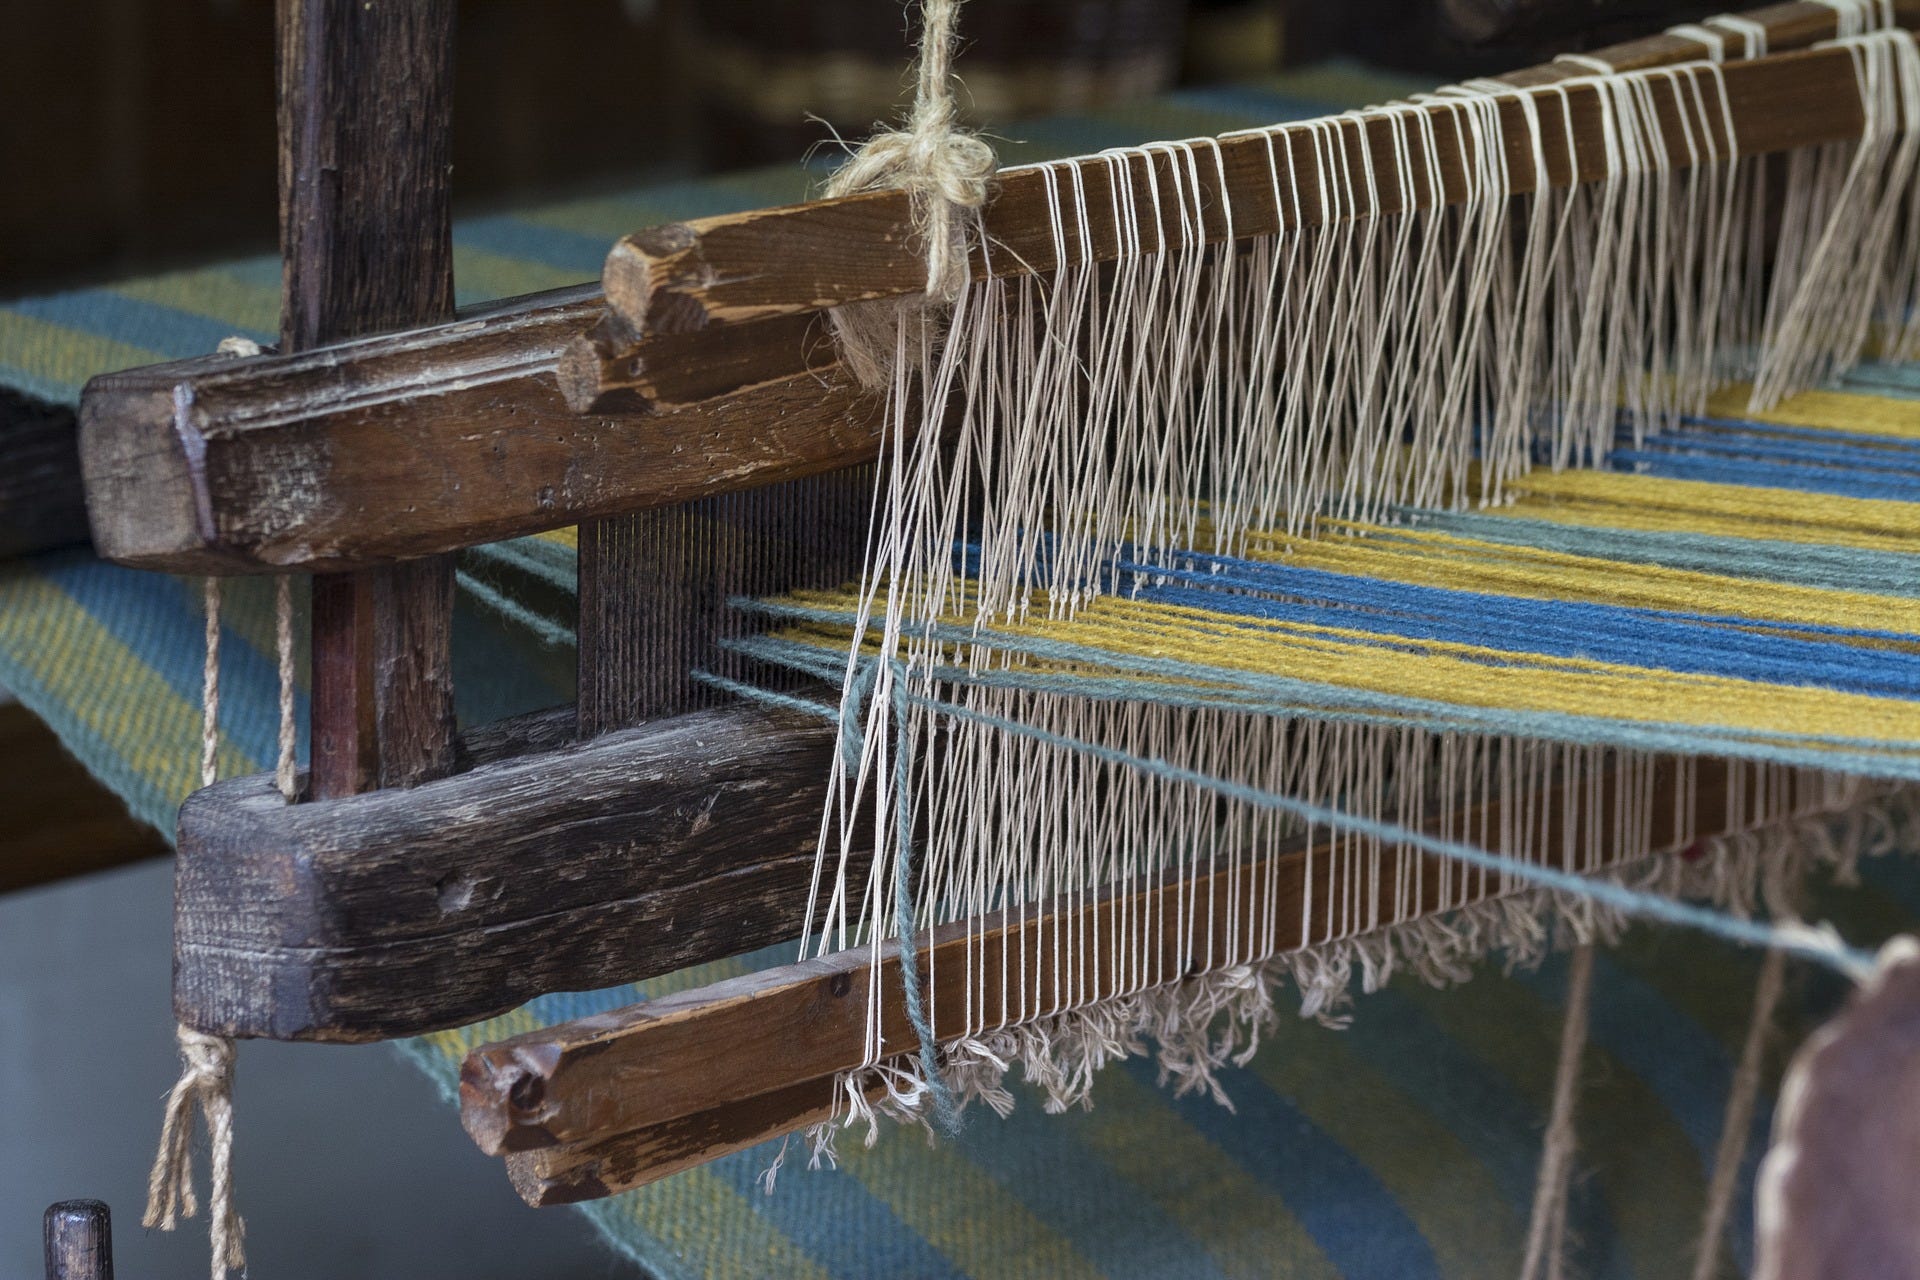 The Ins and Outs of Weaving - Horizon Group USA